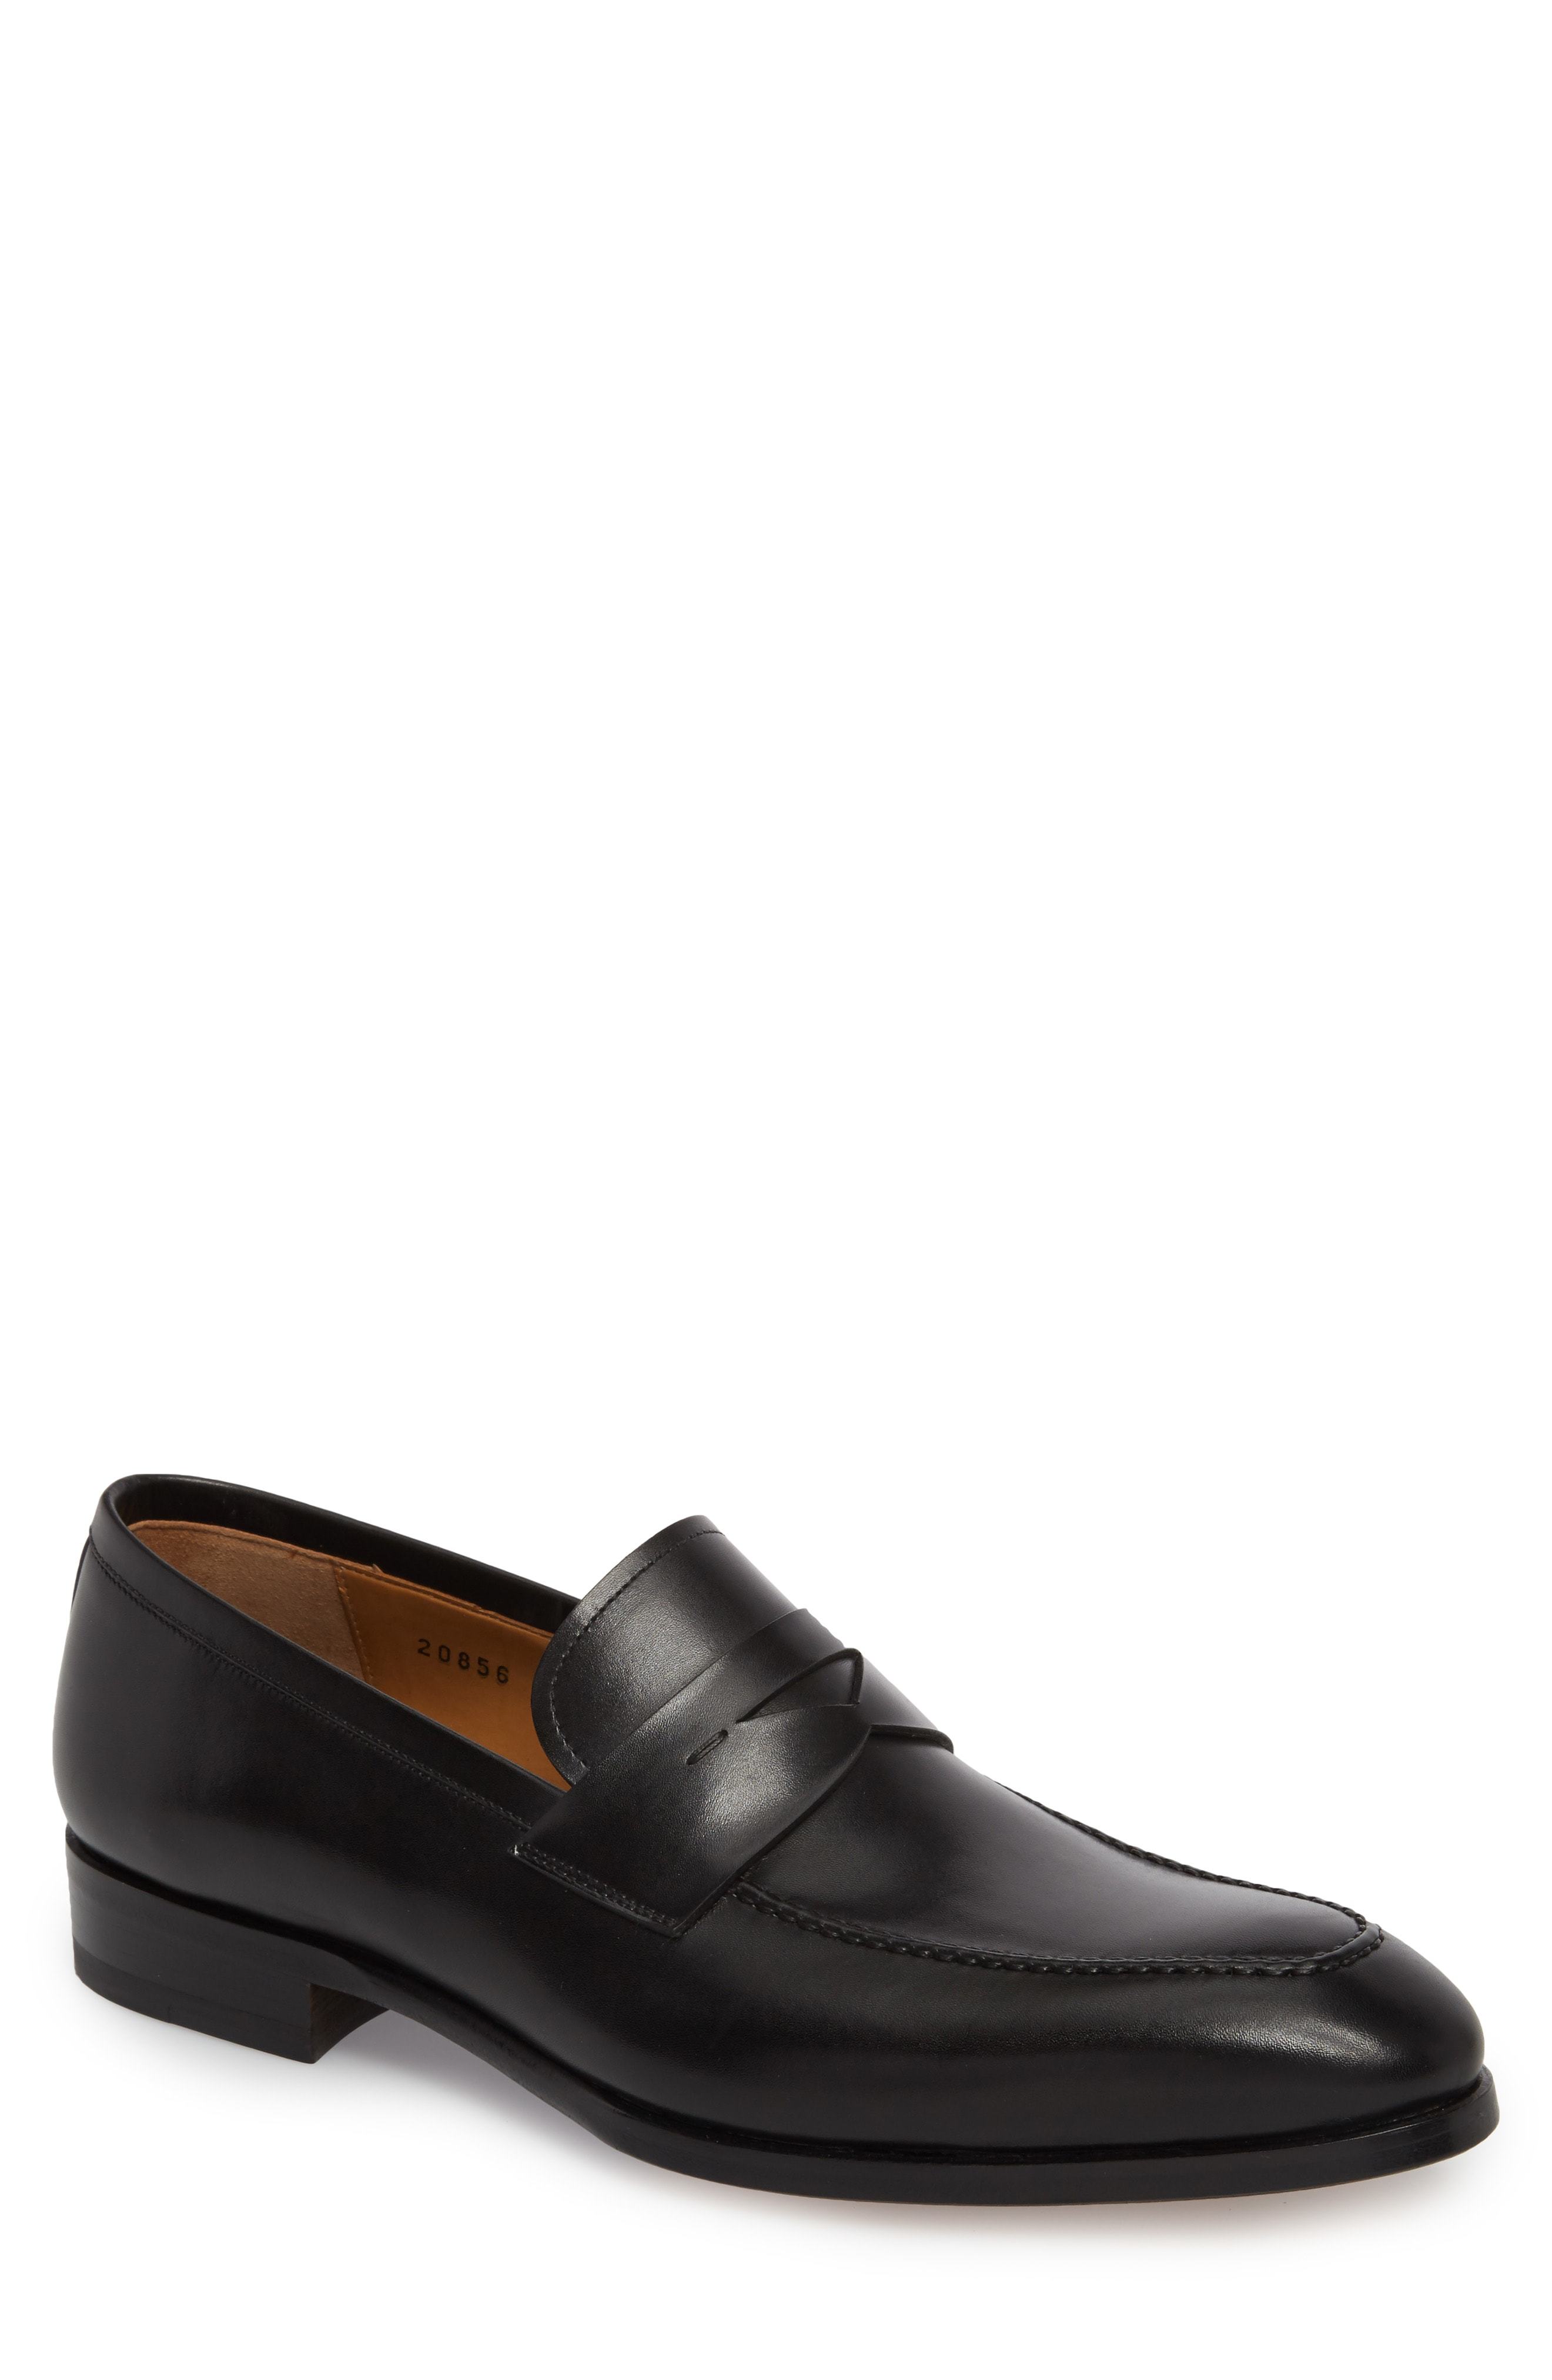 Magnanni Rolly Apron Toe Penny Loafer, $329 | Nordstrom | Lookastic